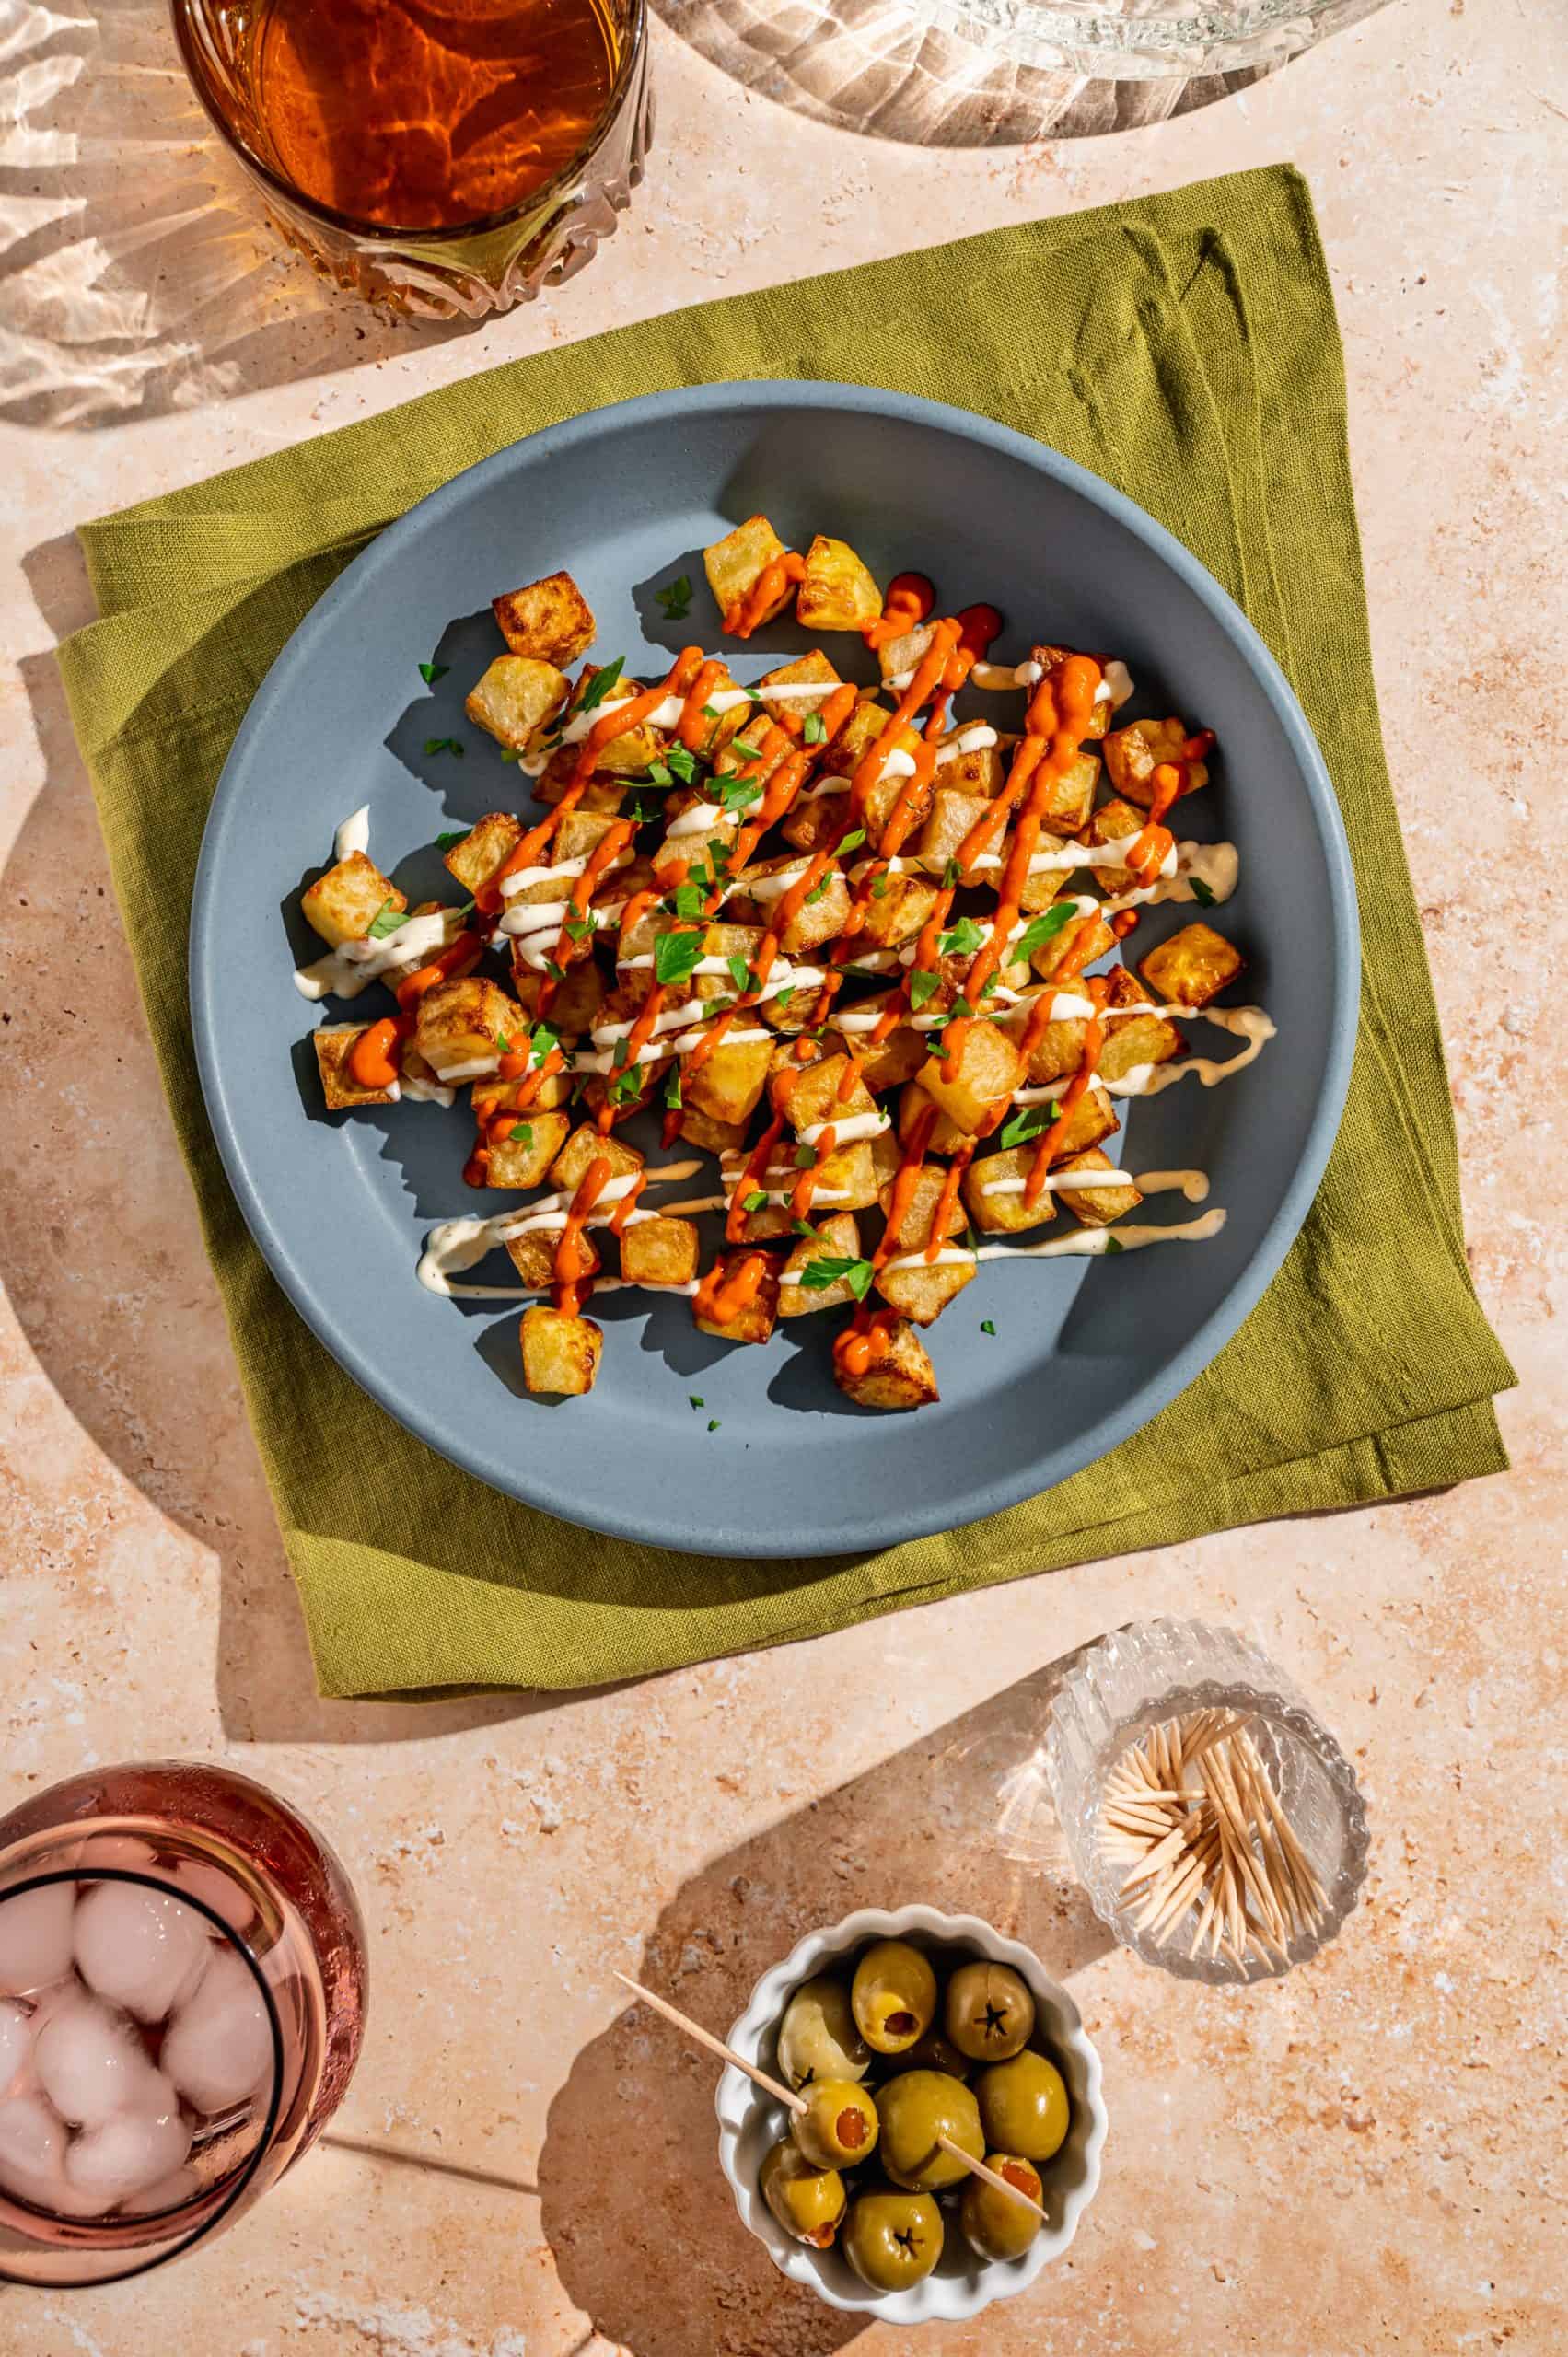 diced potatoes in a shallow dish drizzled with bravas sauce and aioli, garnished with chopped parsley